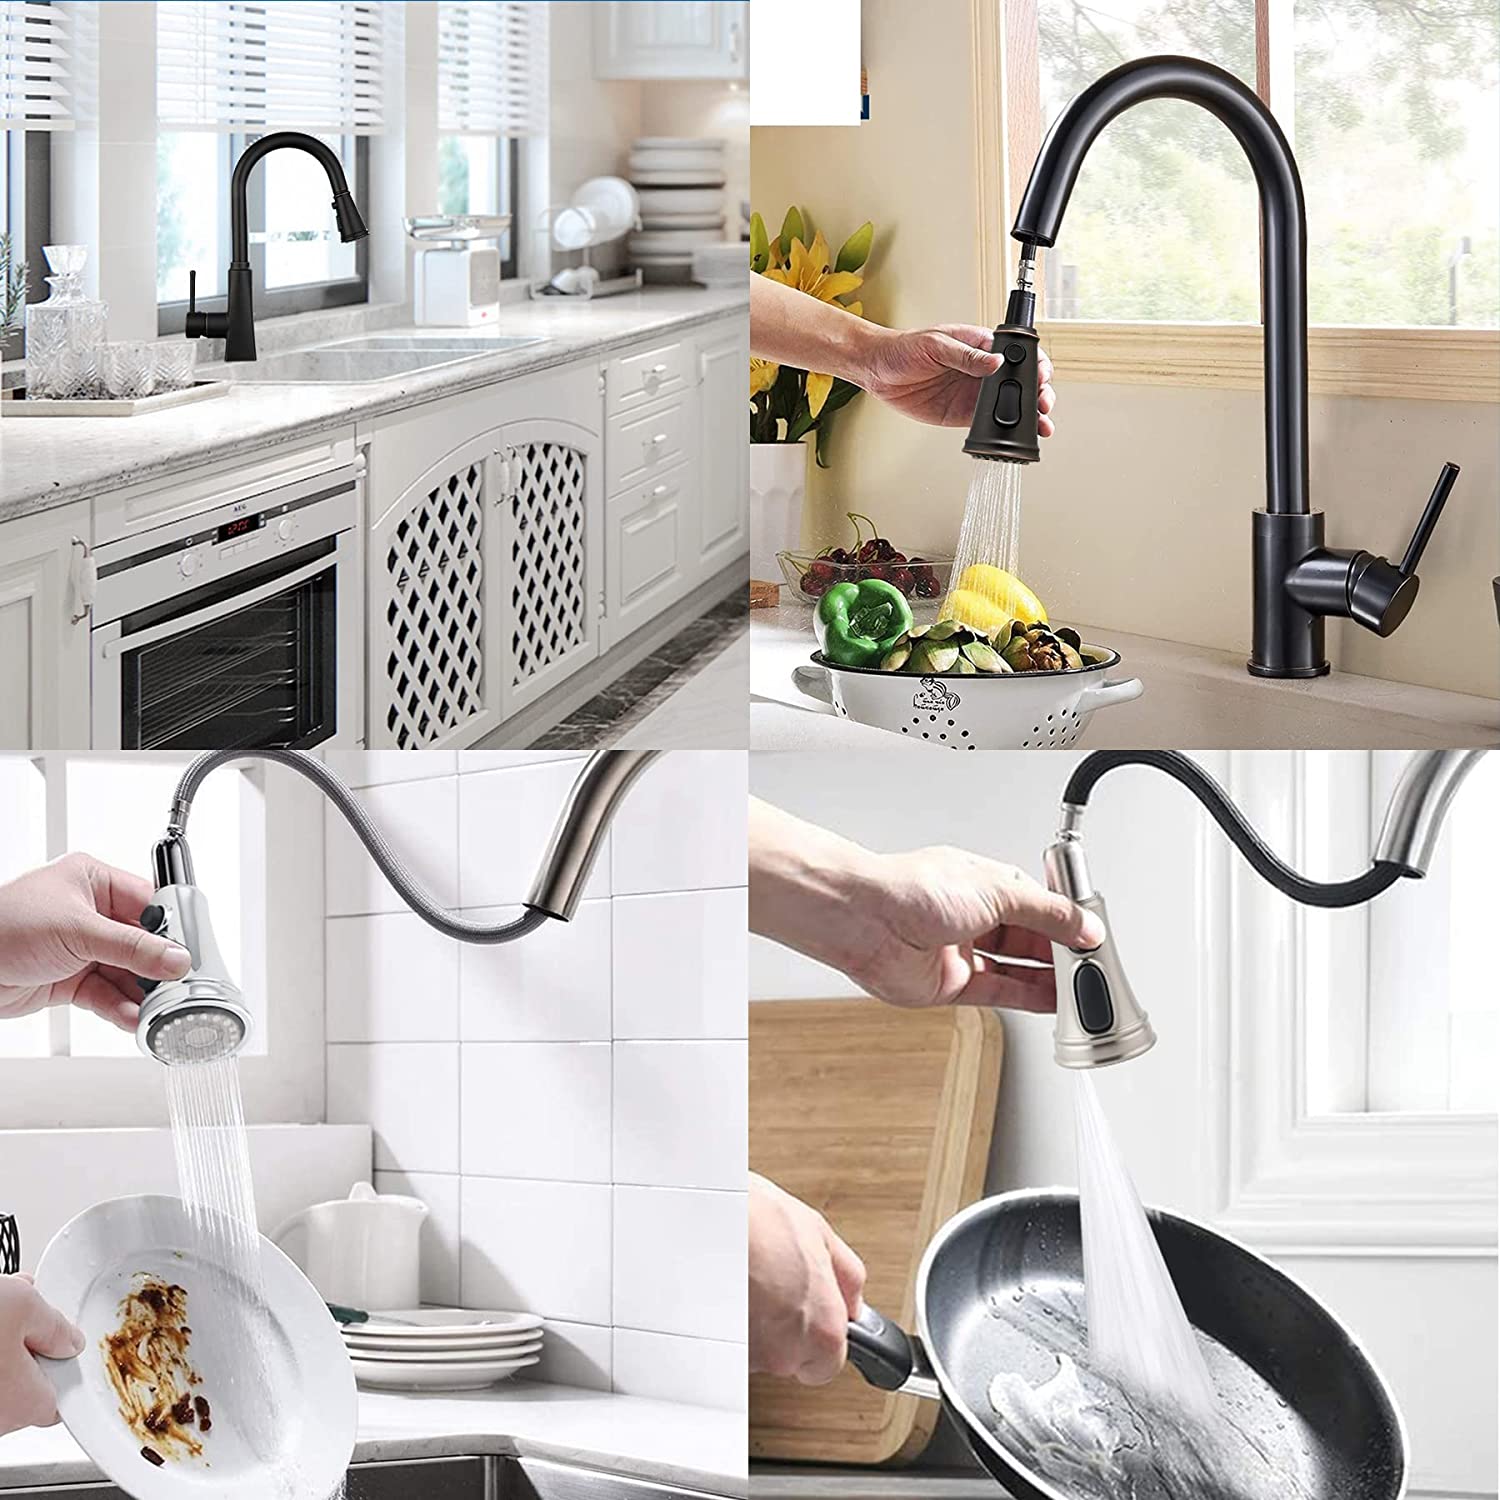 Updated] Gpmsign Universal Pressure Tap Nozzle Pull Down Kitchen Faucet  Sprayer